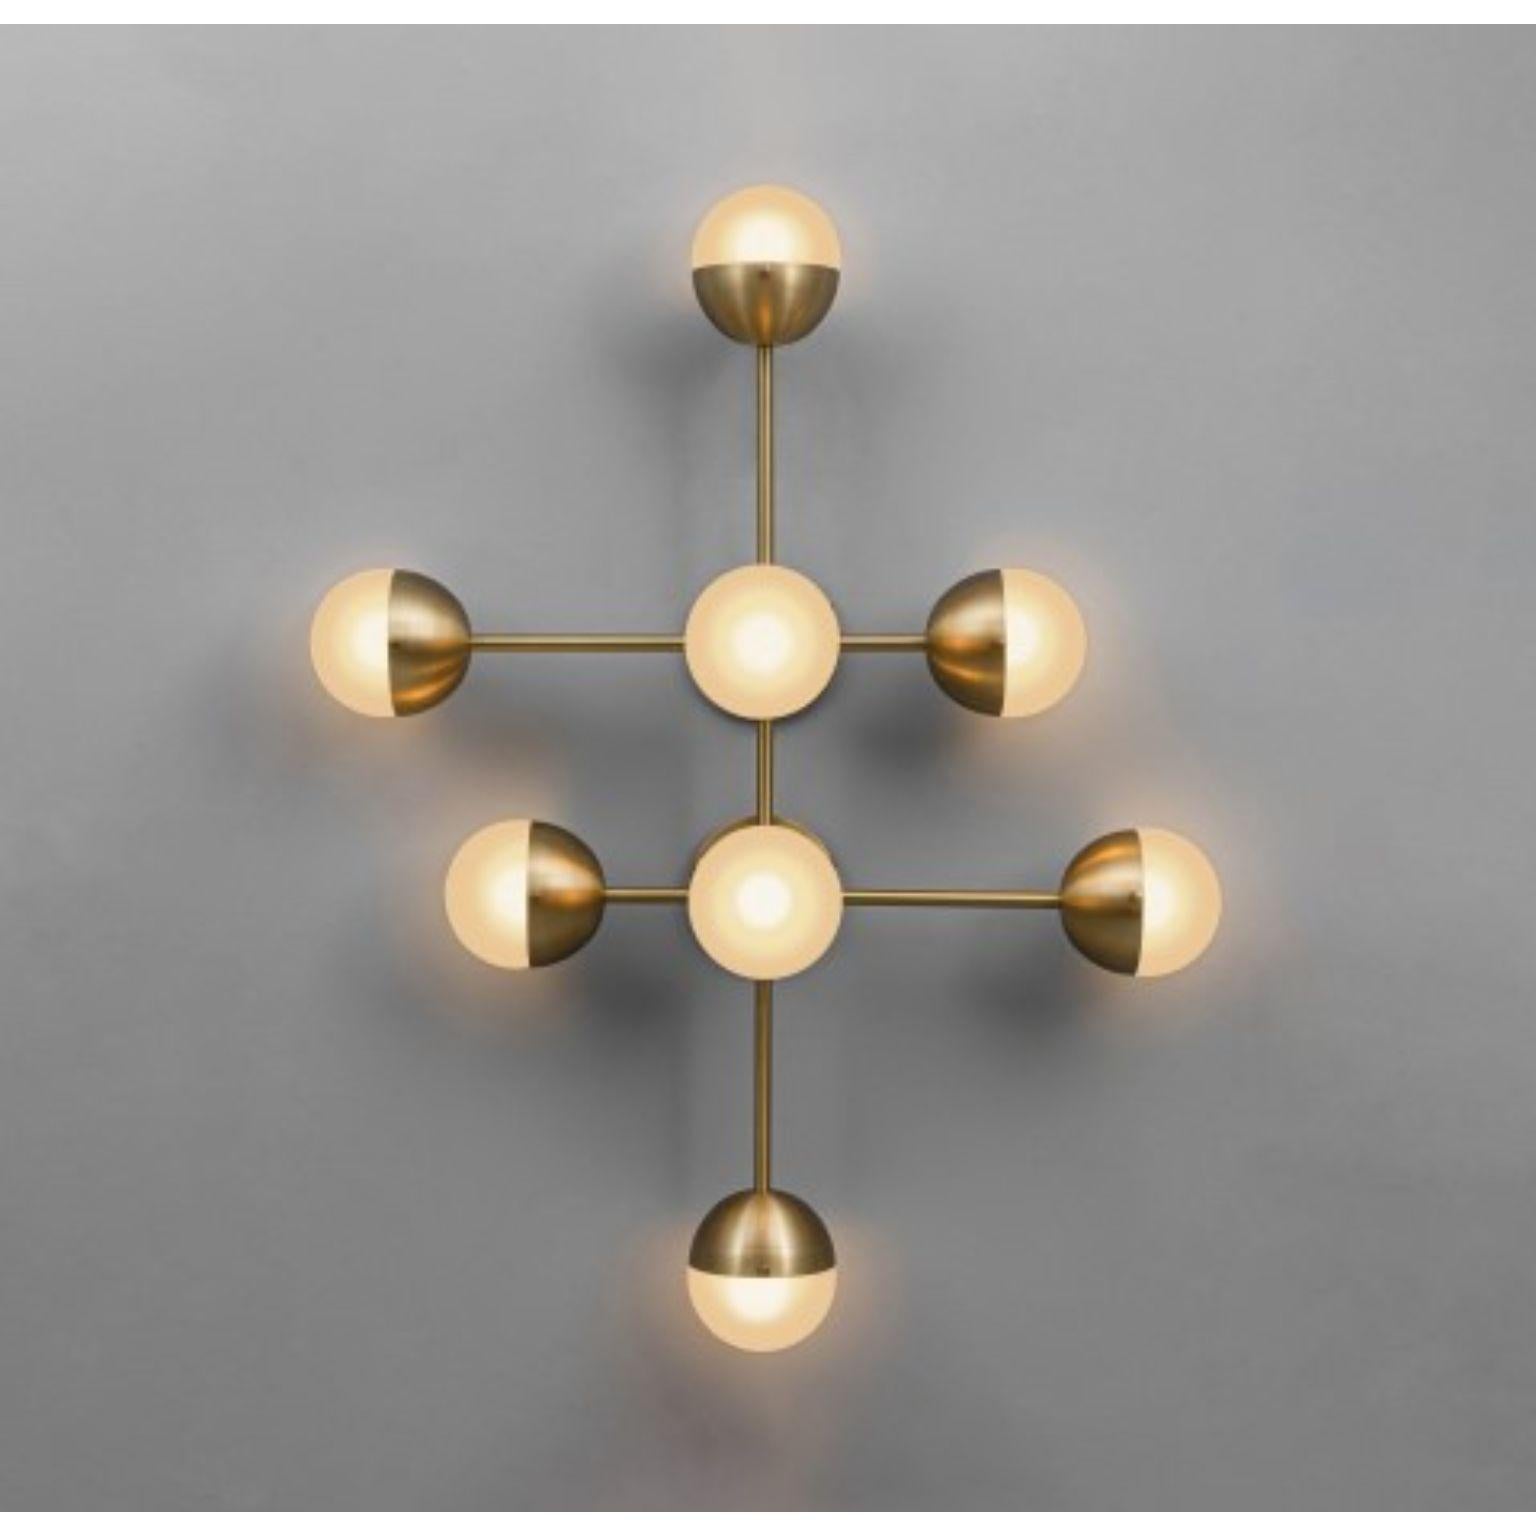 Molecule 8 wall sconce by Schwung
Dimensions: W 73.6 x D 23.4 x H 95.6 cm
Materials: Brass, opal glass
Weight: 6.4kg

Finishes available: Black gunmetal, polished nickel, brass
Other sizes available.

 Schwung is a german word, and loosely defined,